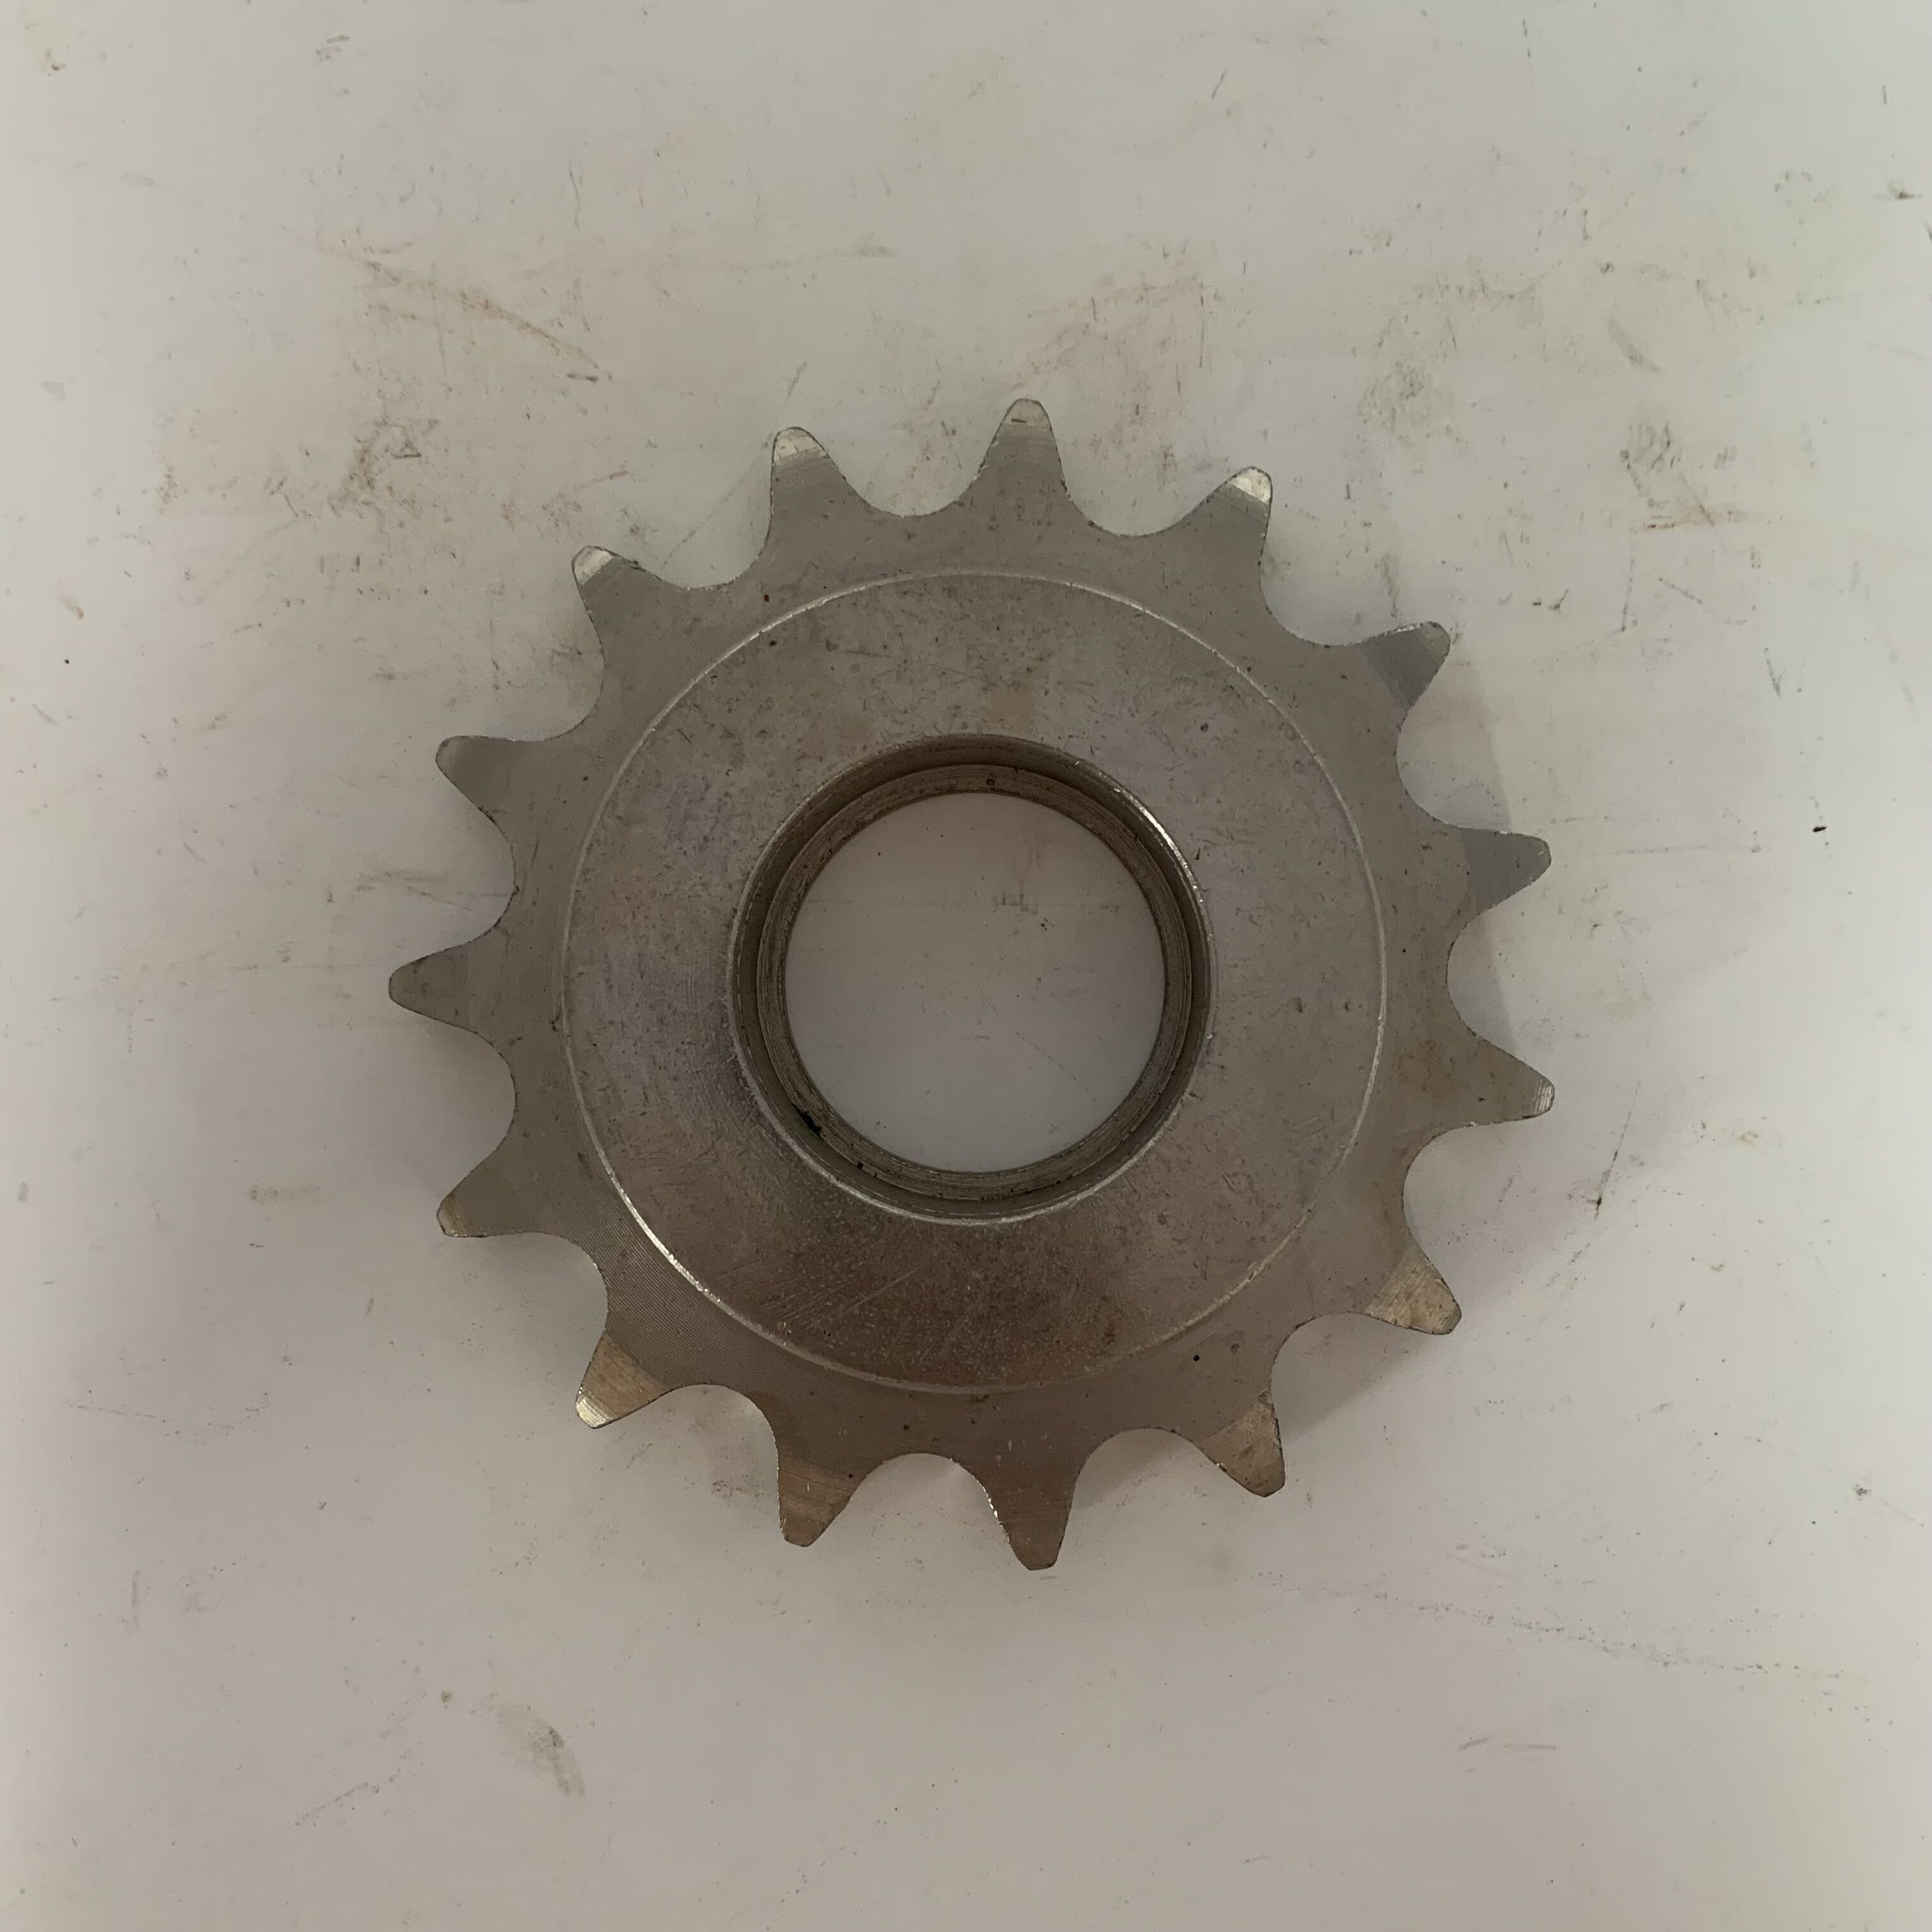 Simplex Carbon Steel Roller Chain Sprockets Pre Bore With Hardened Teeth